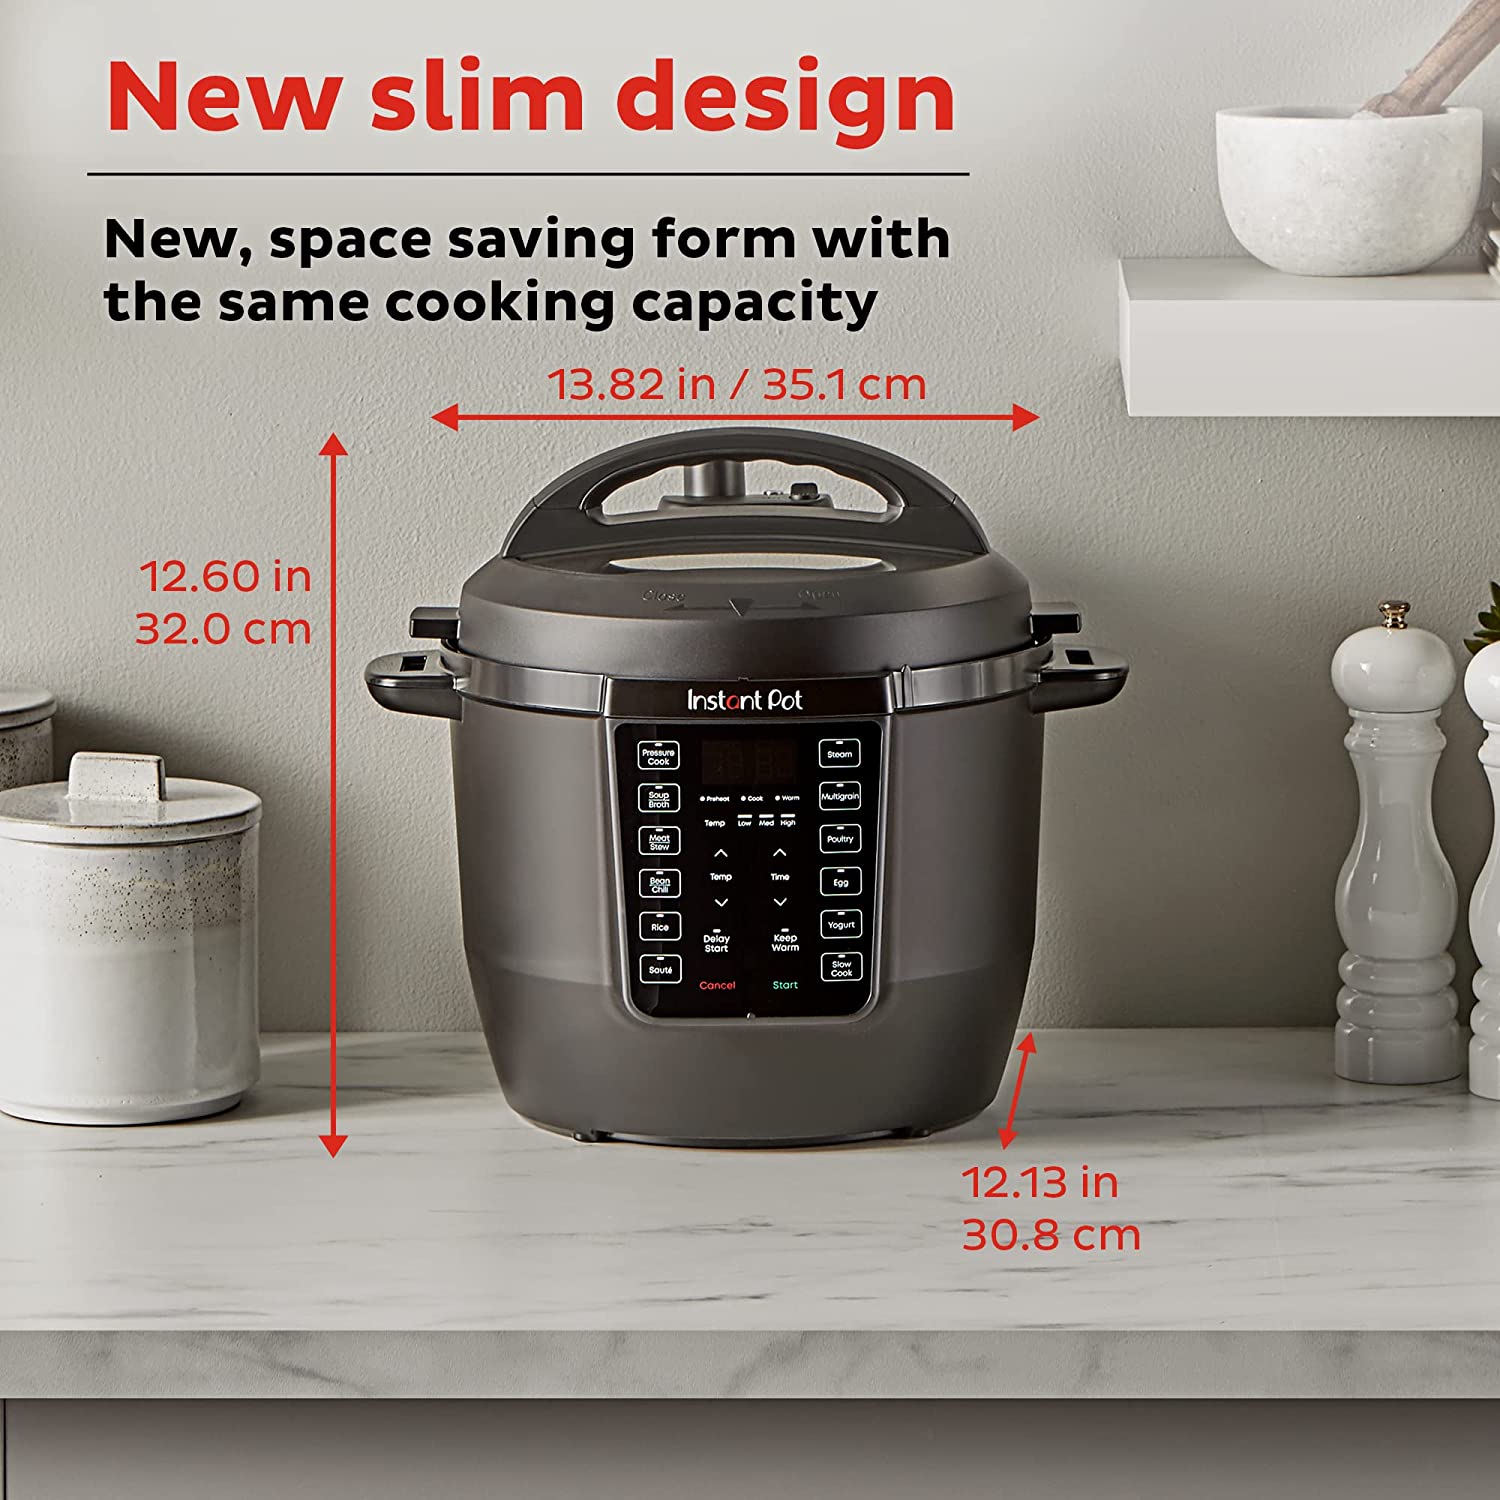 https://bigbigmart.com/wp-content/uploads/2023/07/Instant-Pot-RIO-Formerly-Known-as-Duo-7-in-1-Electric-Multi-Cooker-Pressure-Cooker-Slow-Cooker-Rice-Cooker-Steamer-Saute-Yogurt-Maker-Warmer-Includes-App-With-Over-800-Recipes-6-Quart6.jpg